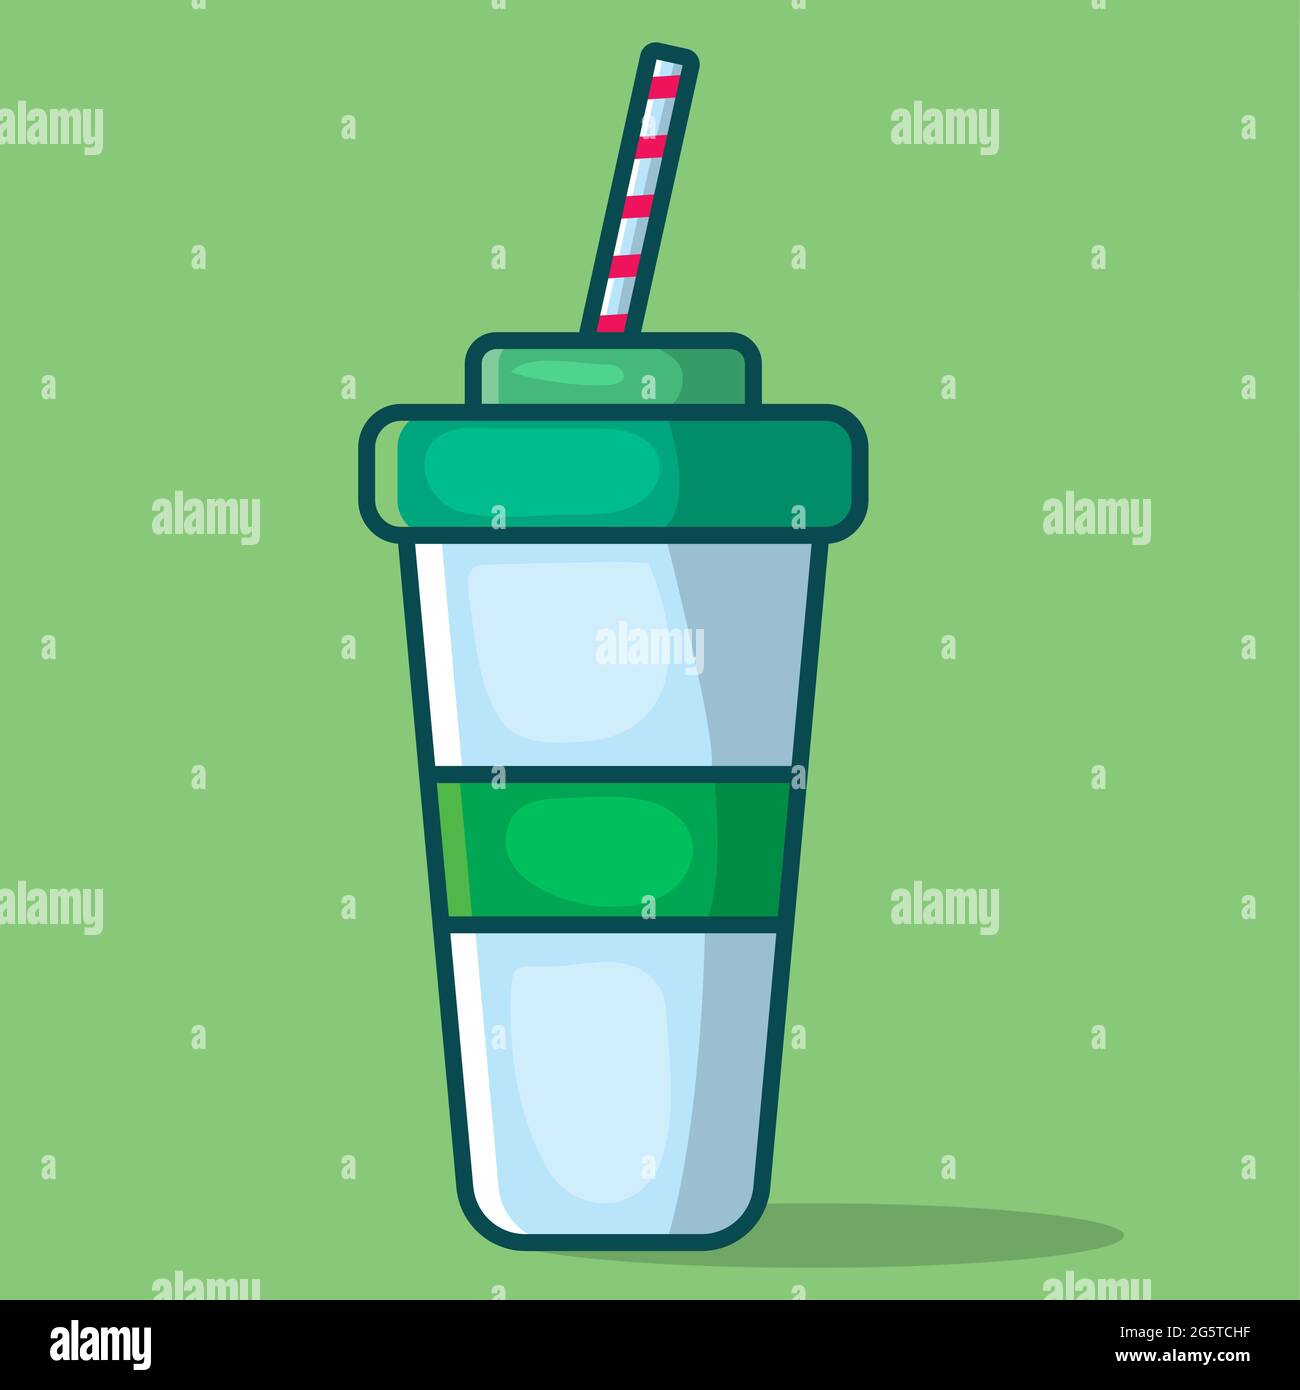 instant cup tea vector illustration in flat style Stock Vector